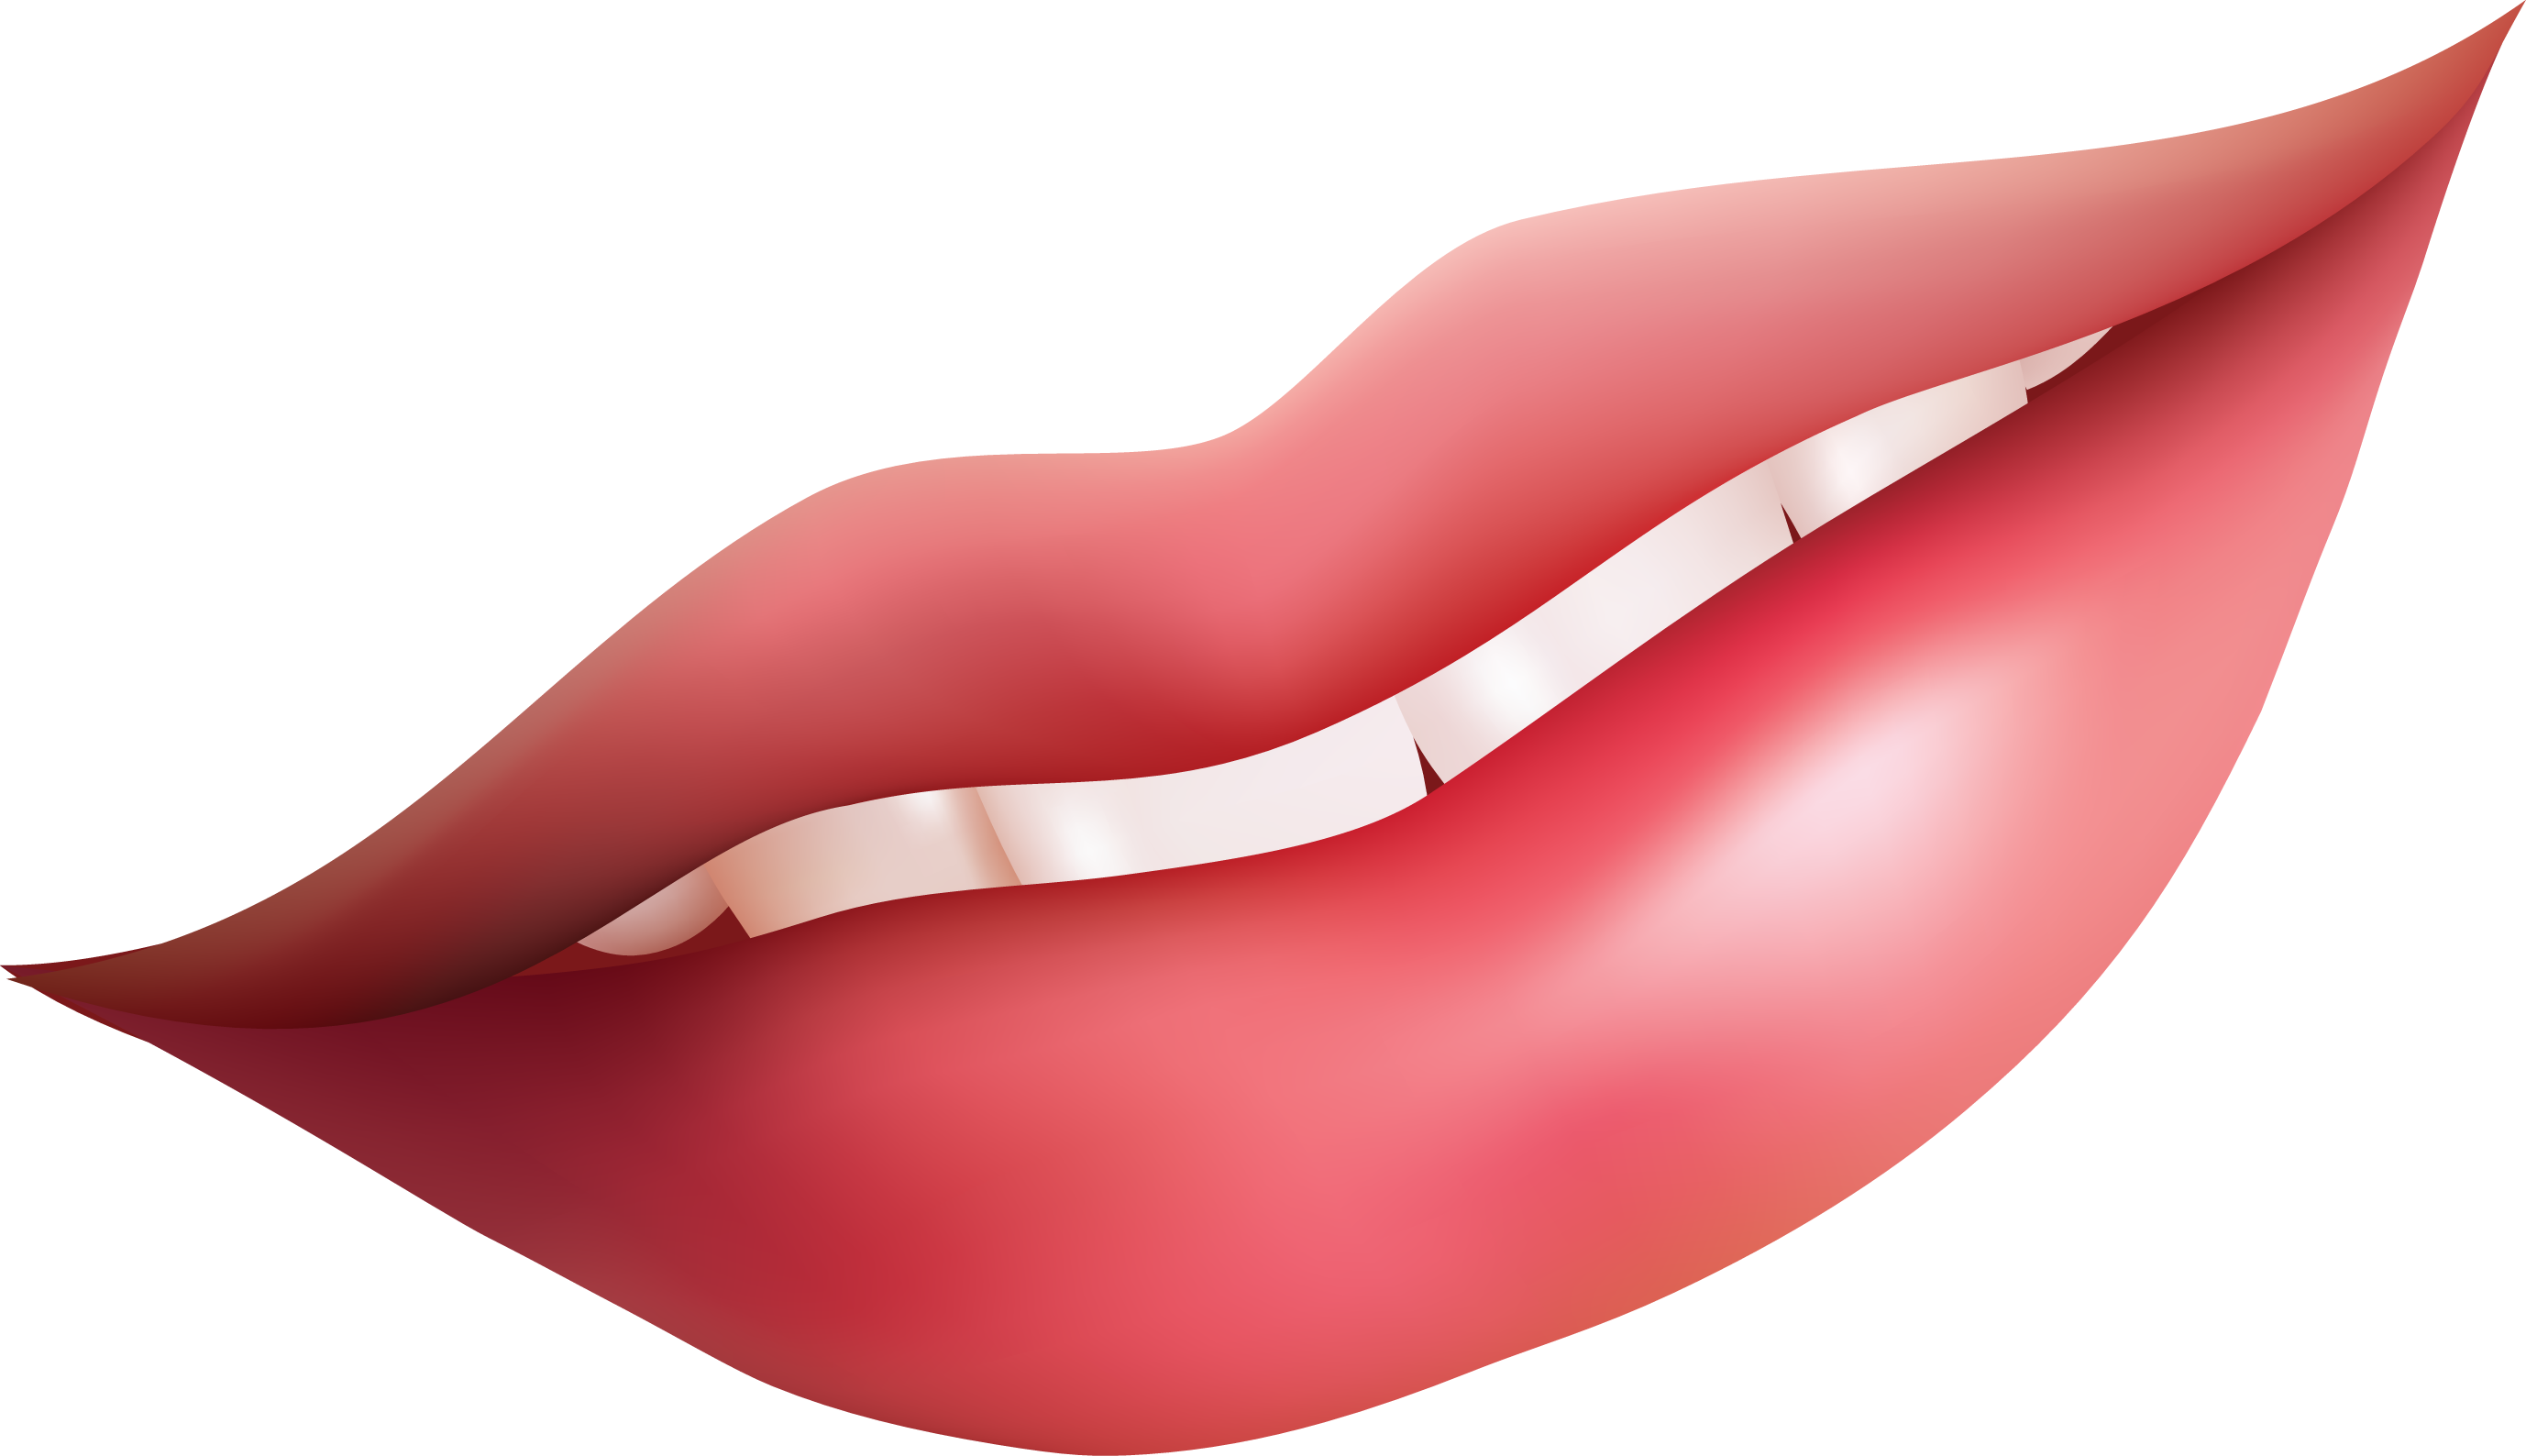 Lips Open Mouth Image Transparent Image Clipart